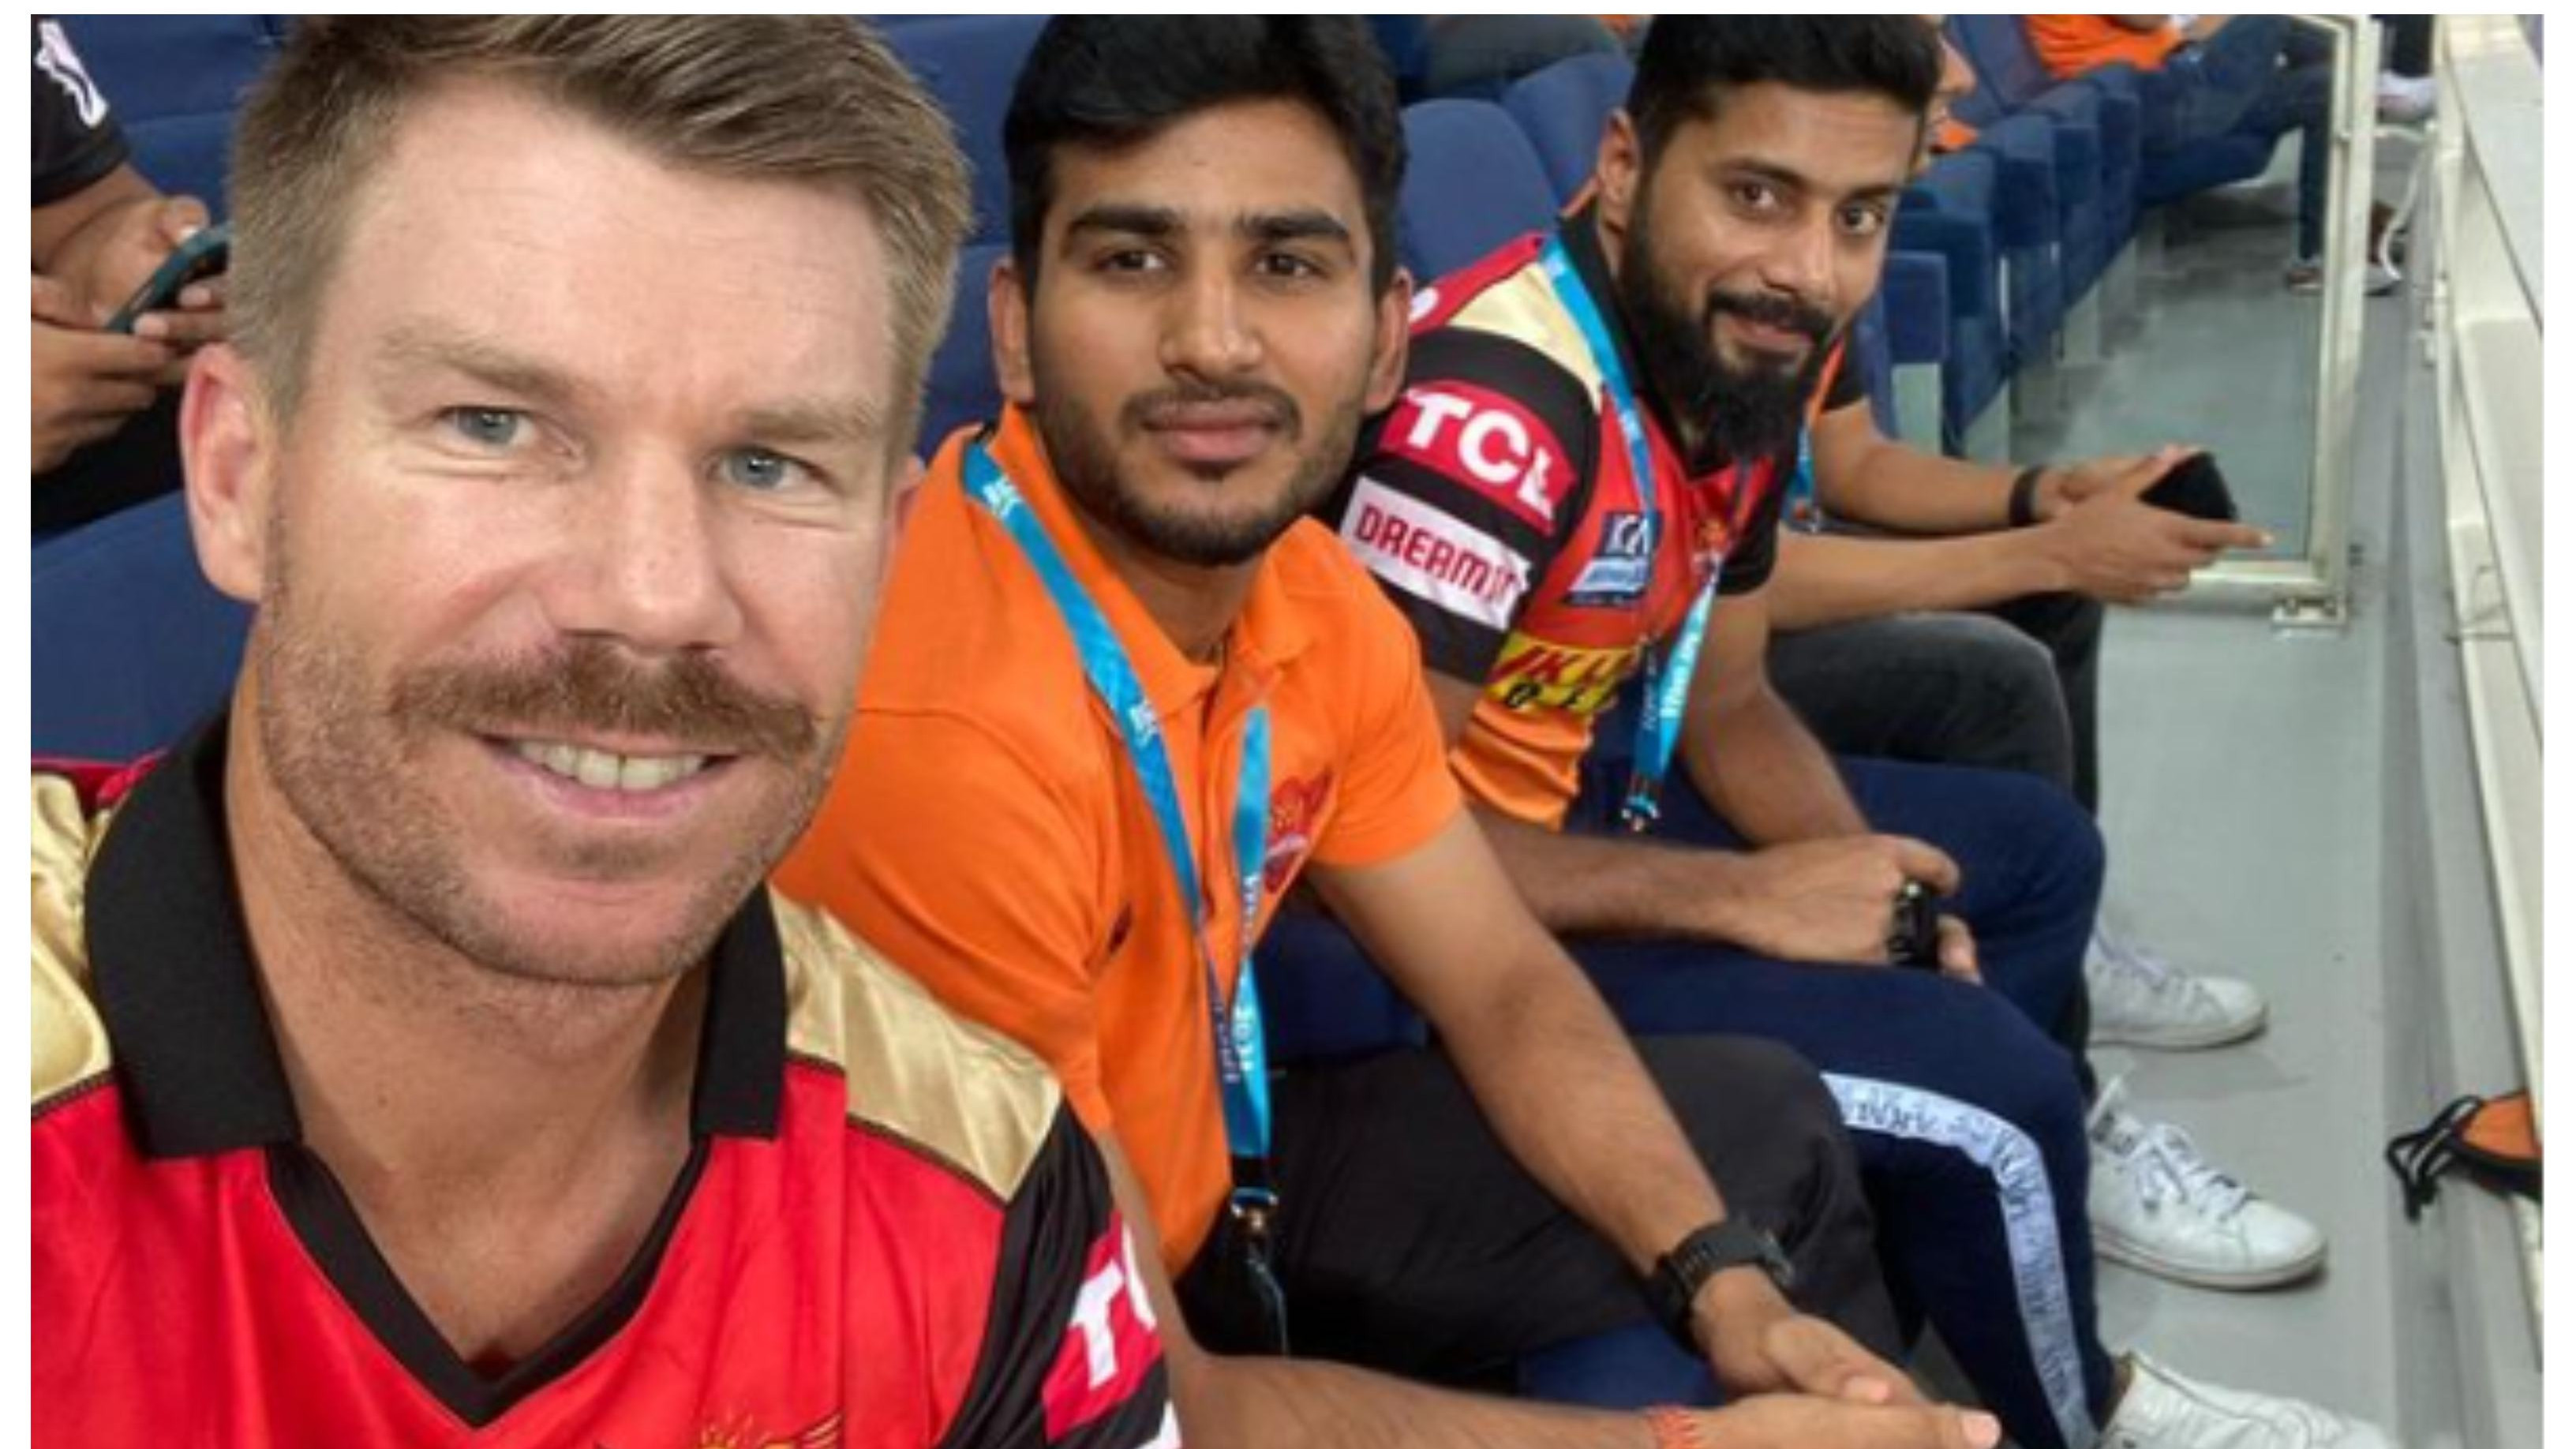 IPL 2021: David Warner shares picture from the ground during SRH vs KKR match; spotted out of SRH’s dugout